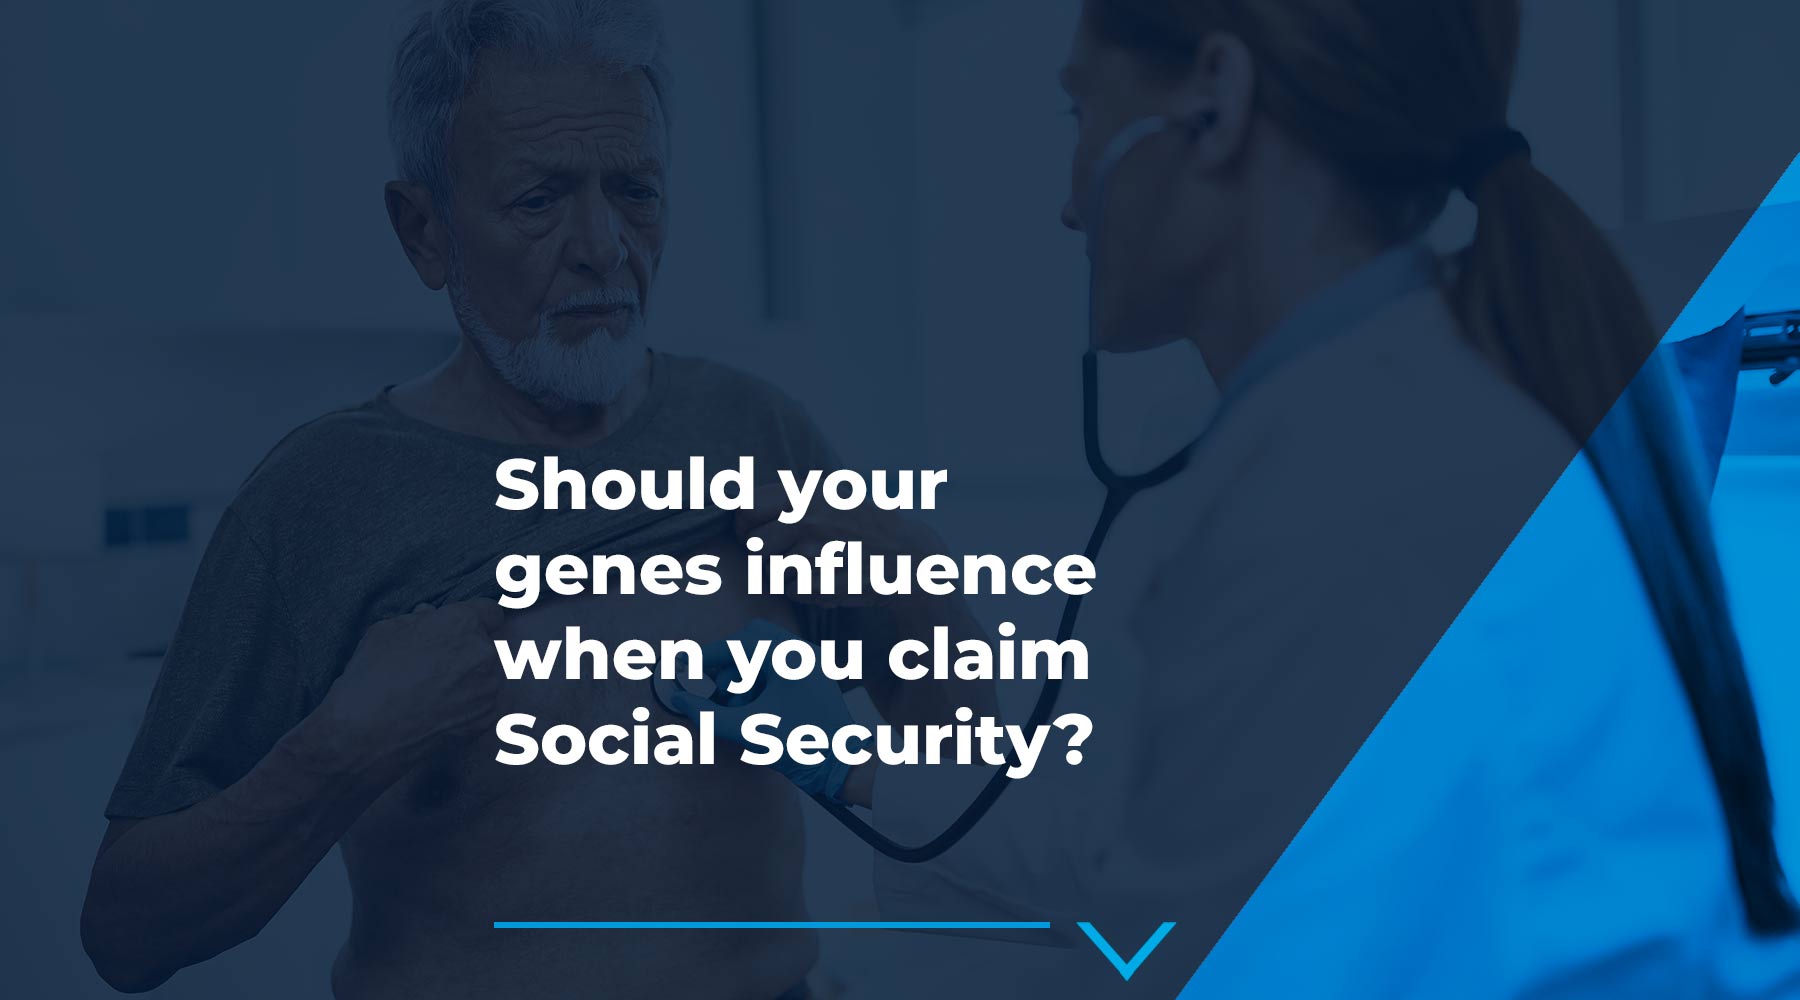 Should your genes influence when you claim Social Security?